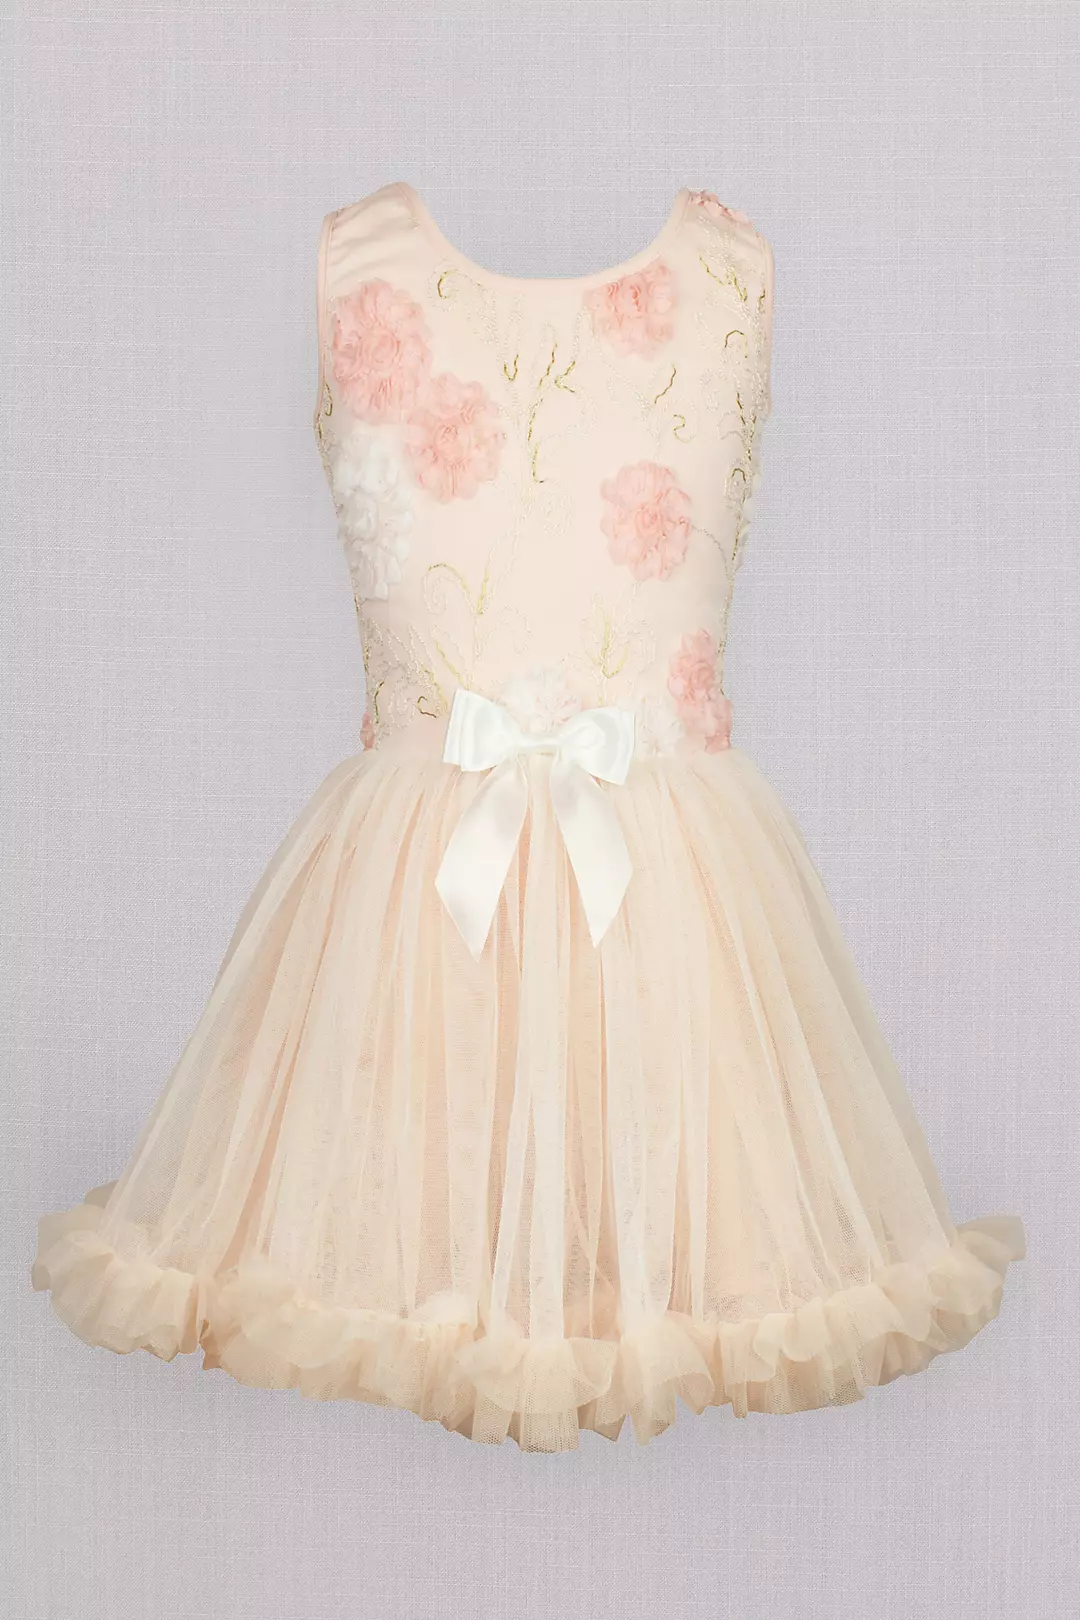 Ballerina Flower Girl Dress with Floral Appliques Image